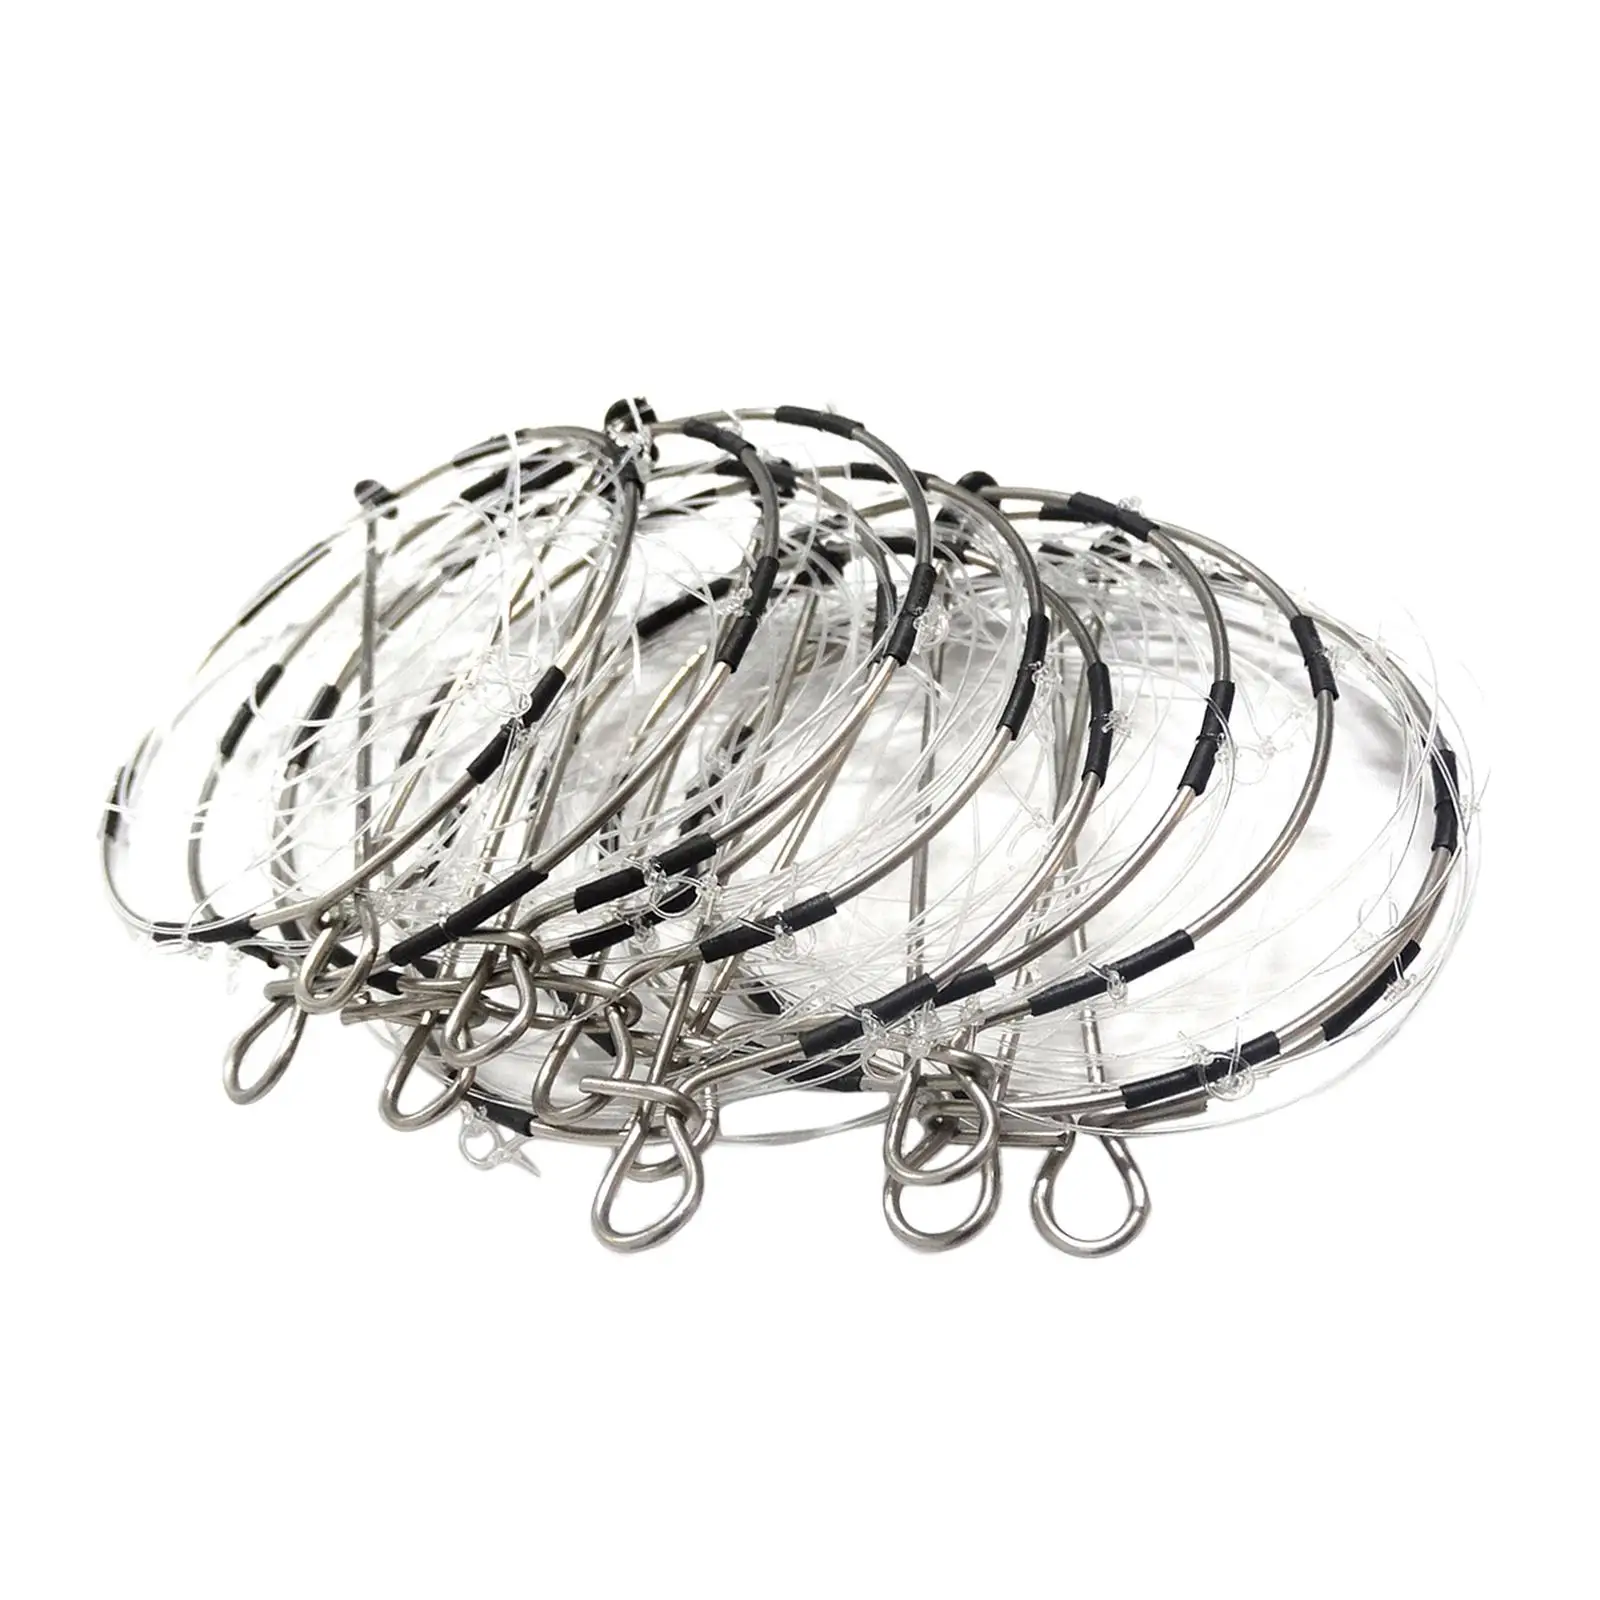 10Pcs Crab Trap 6-ring Repeated Use Cast Dip Cage Portable Steel Fishing Bait Trap for Crayfish Crab Crawdad Crawfish Reservoirs